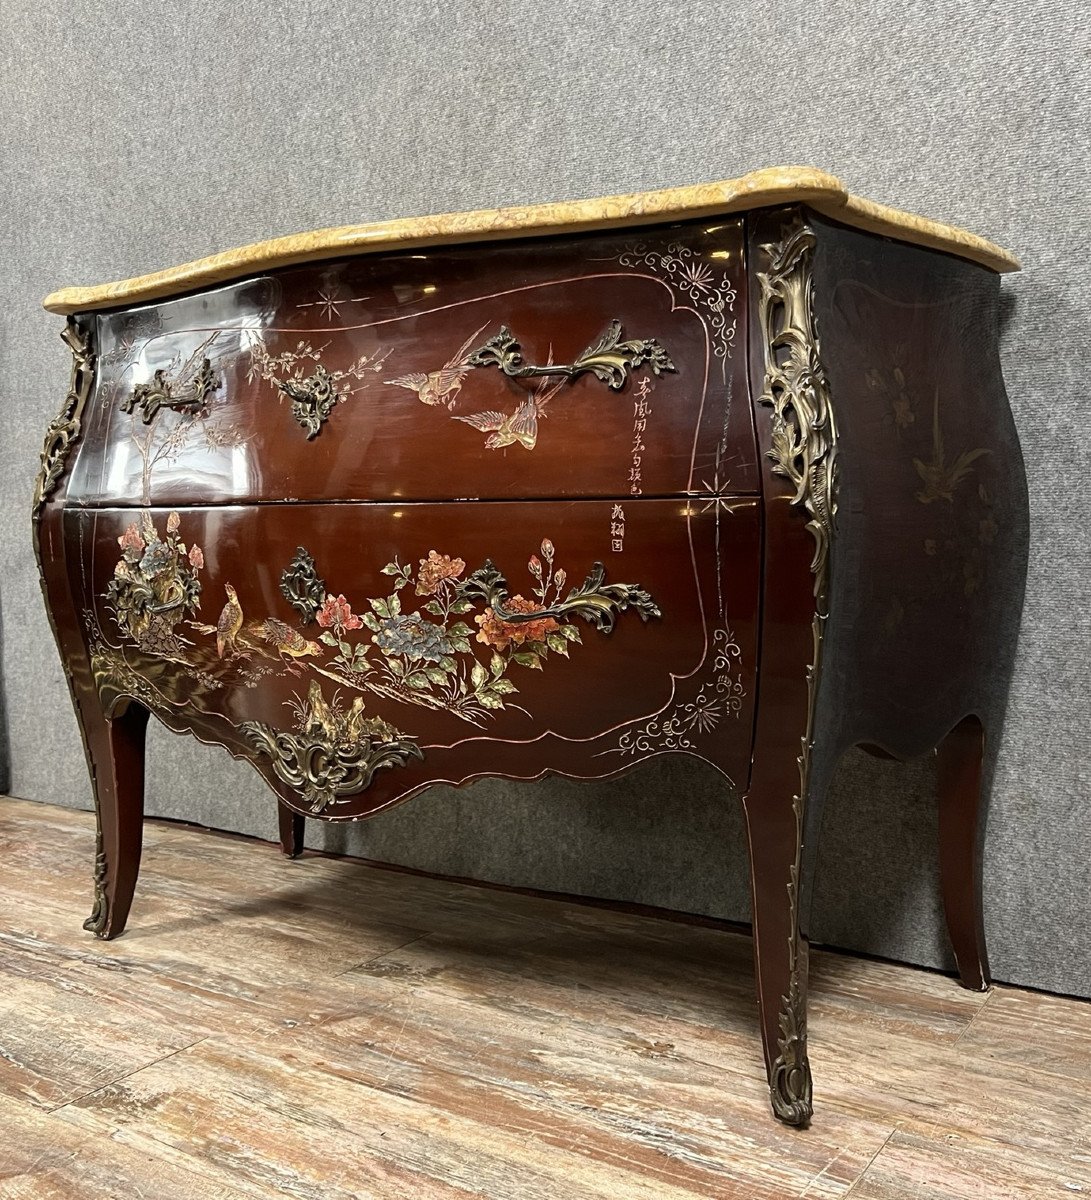 Curved Sauteuse Commode In Lacquer With Chinese Decor 20th Century (b)   -photo-3